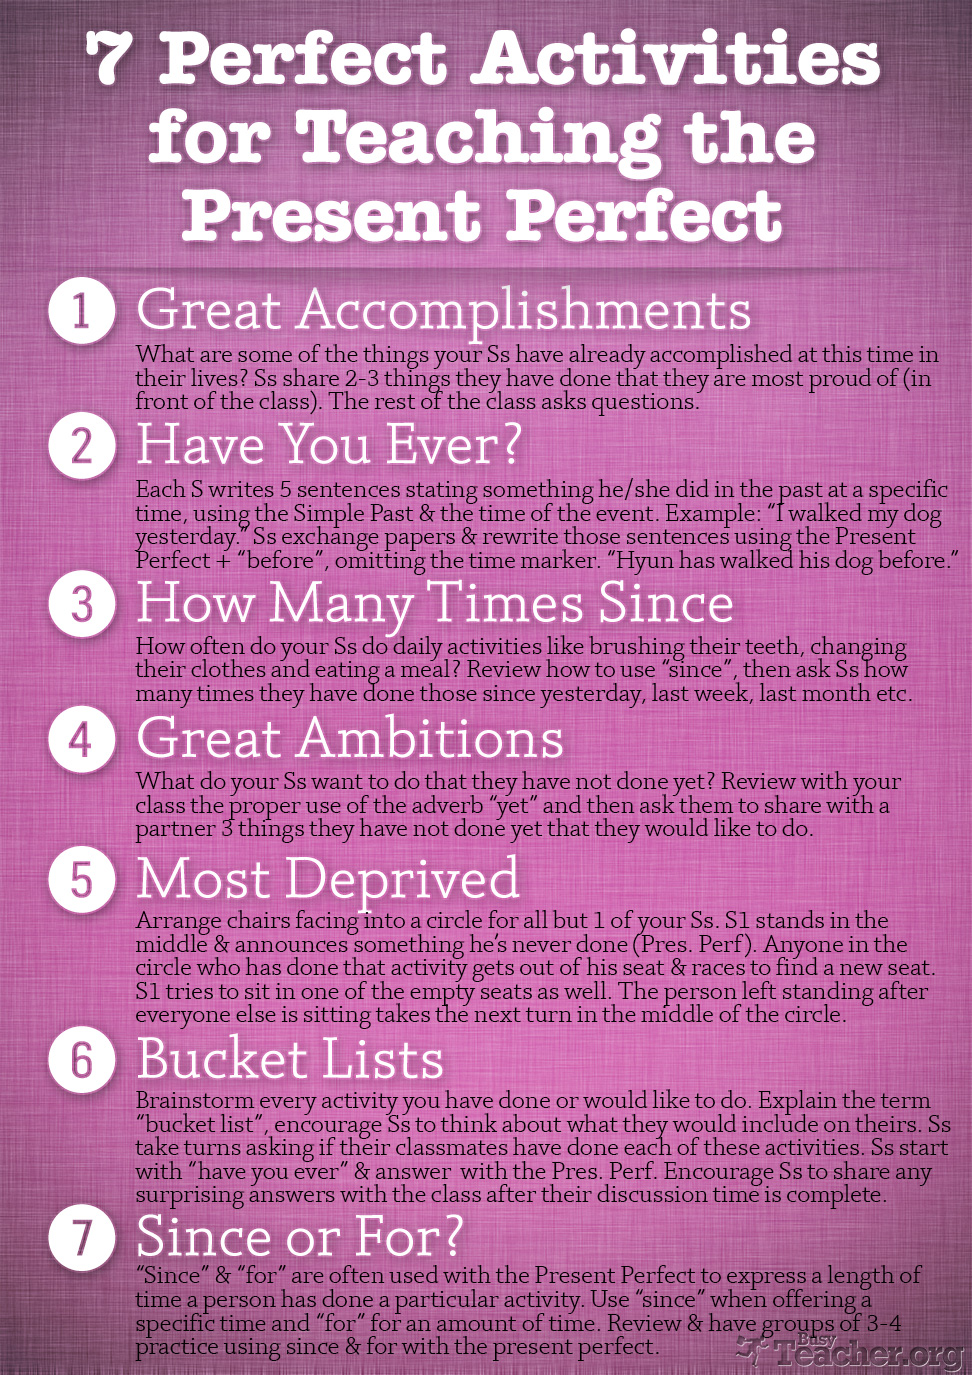 POSTER: 7 Perfect Activities to Teach the Present Perfect